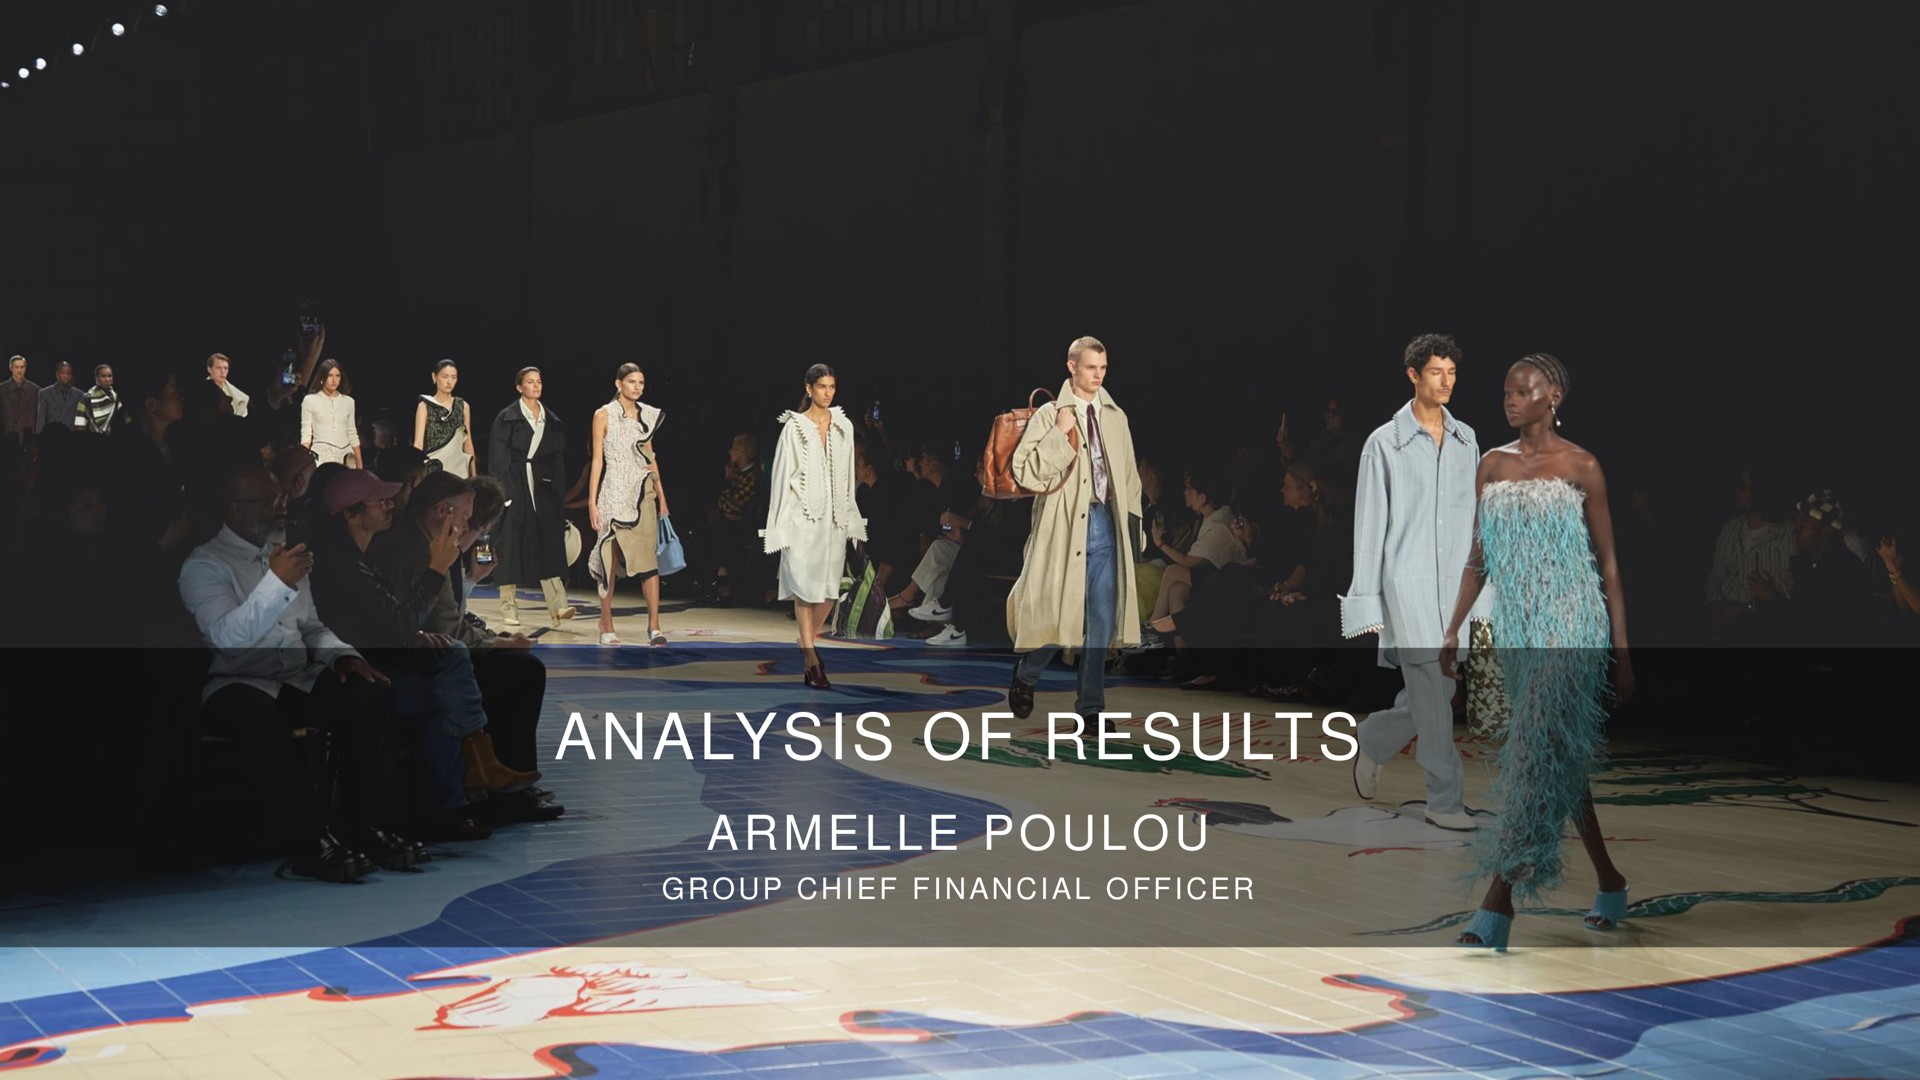 analysis of results arm group chief financial officer | Kering